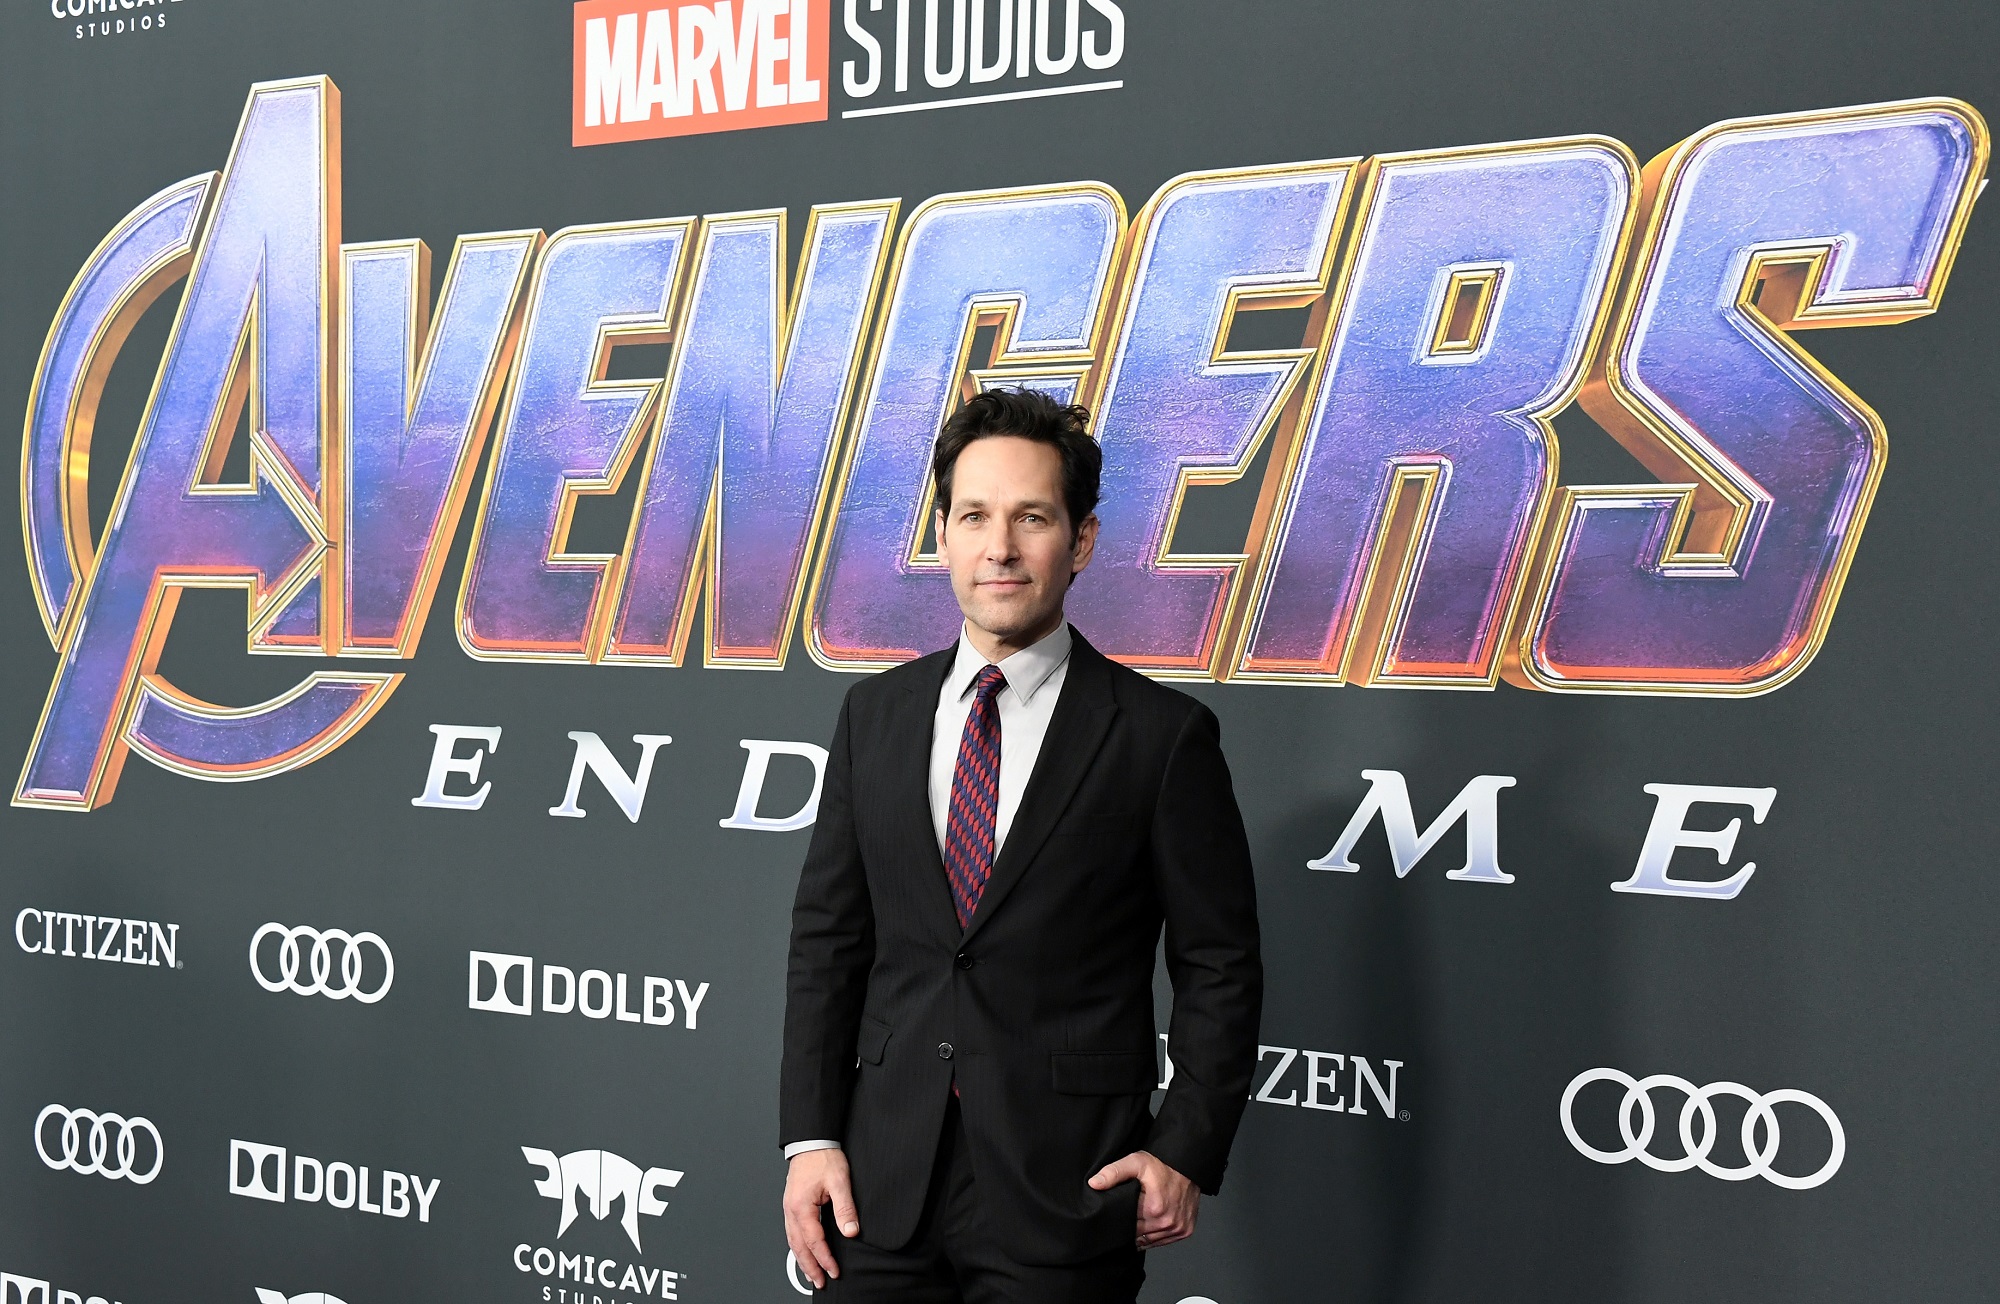 Paul Rudd attends the world premiere of Walt Disney Studios Motion Pictures 'Avengers: Endgame' on April 22, 2019 in Los Angeles, California.